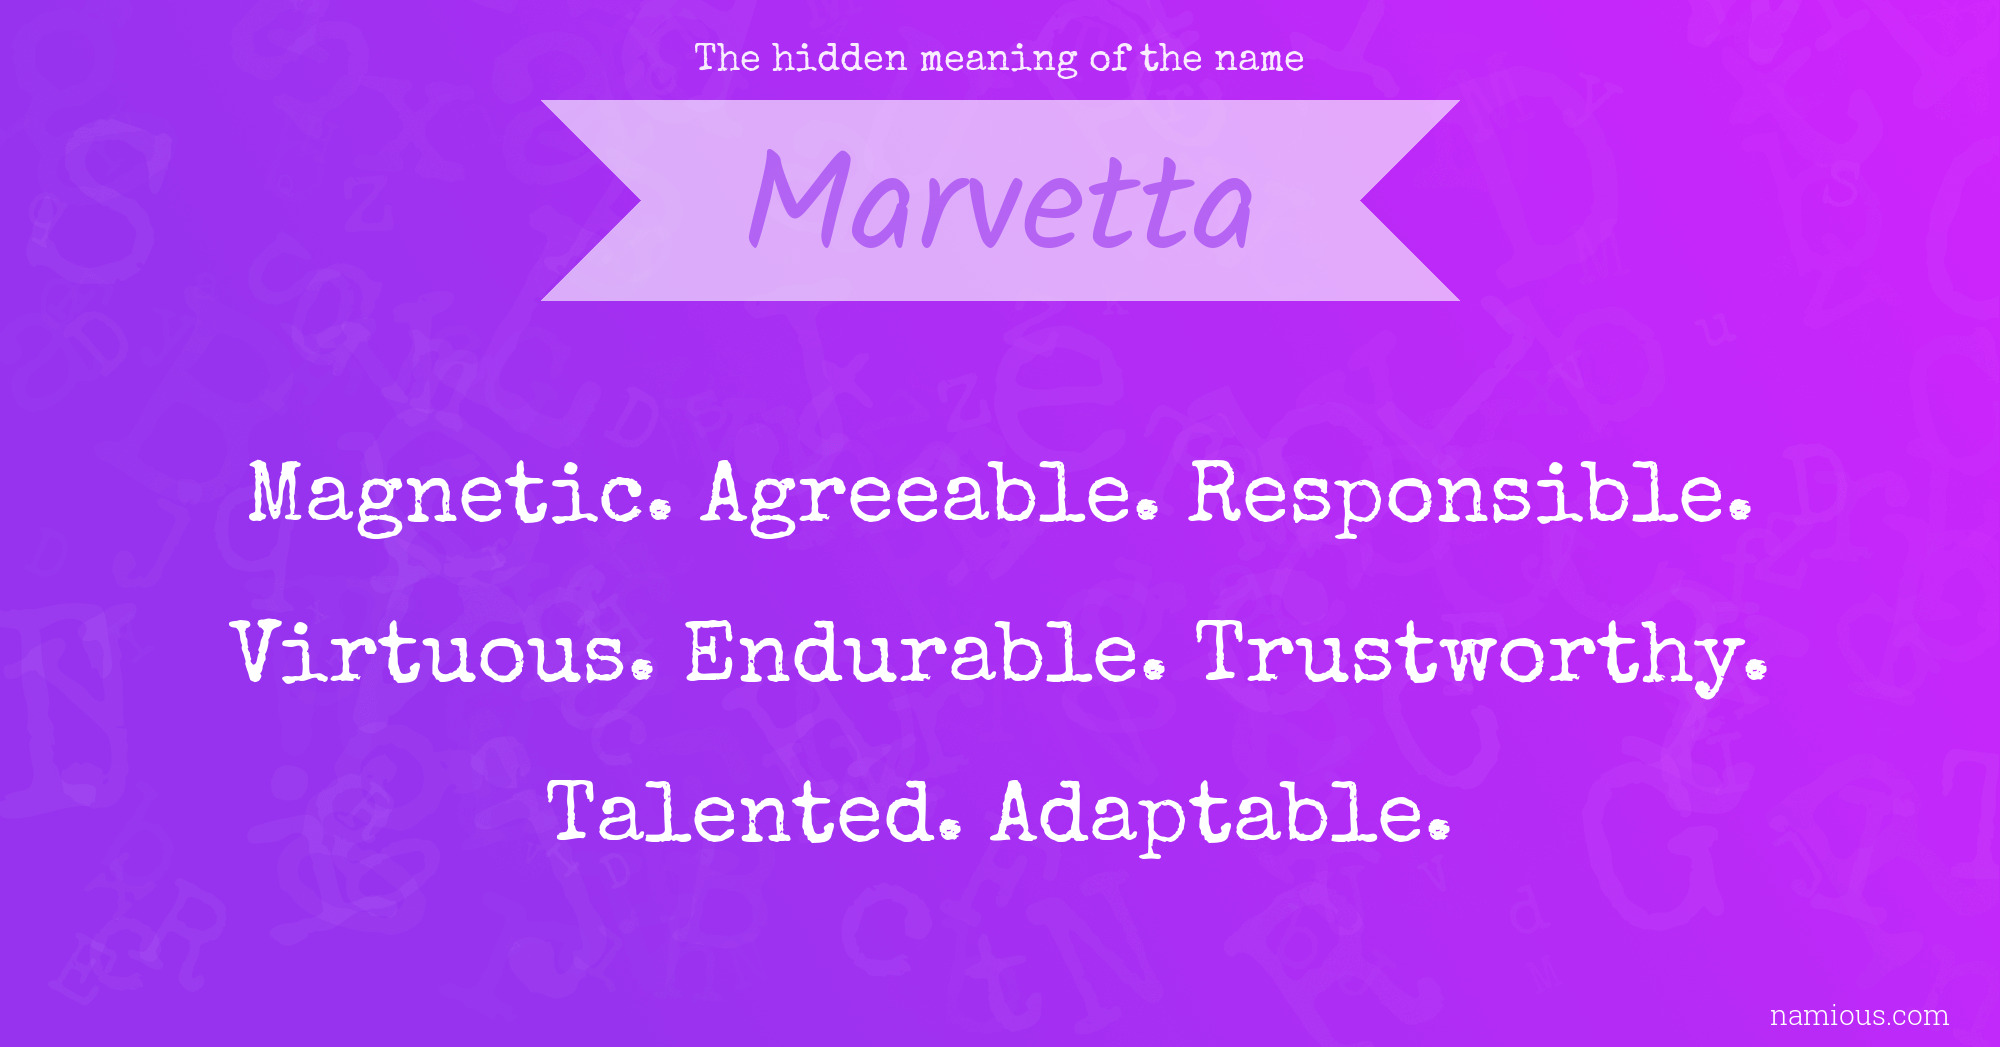 The hidden meaning of the name Marvetta